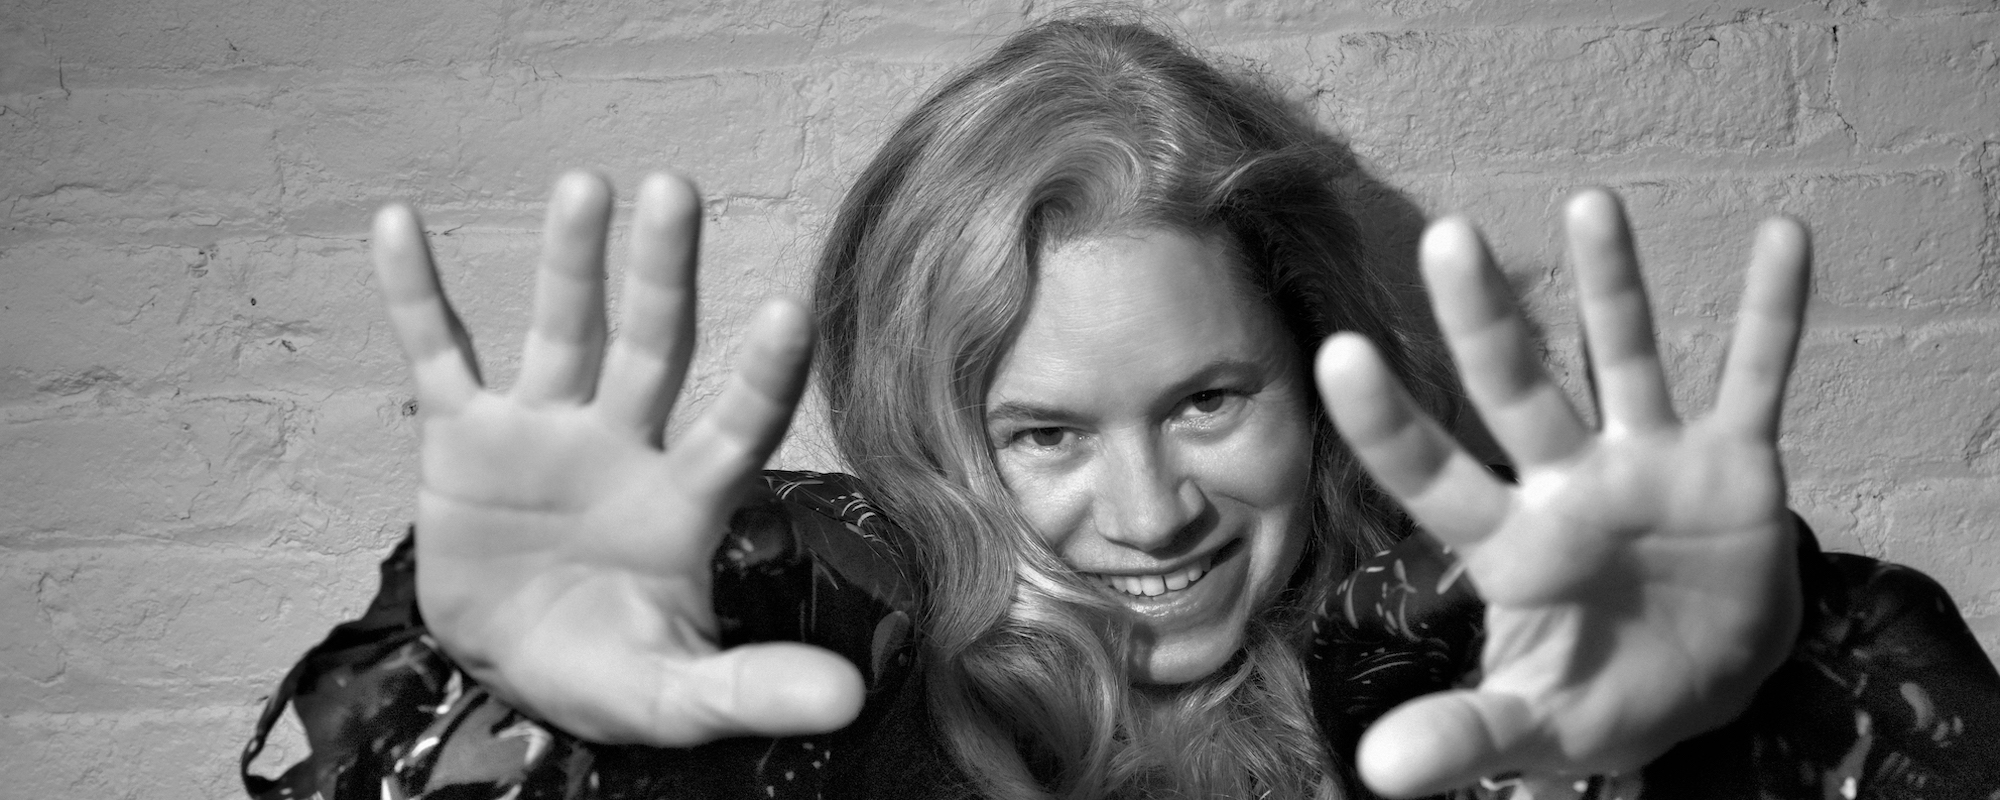 The Writer’s Block: Natalie Merchant on Songwriting and Where She Gets Inspiration